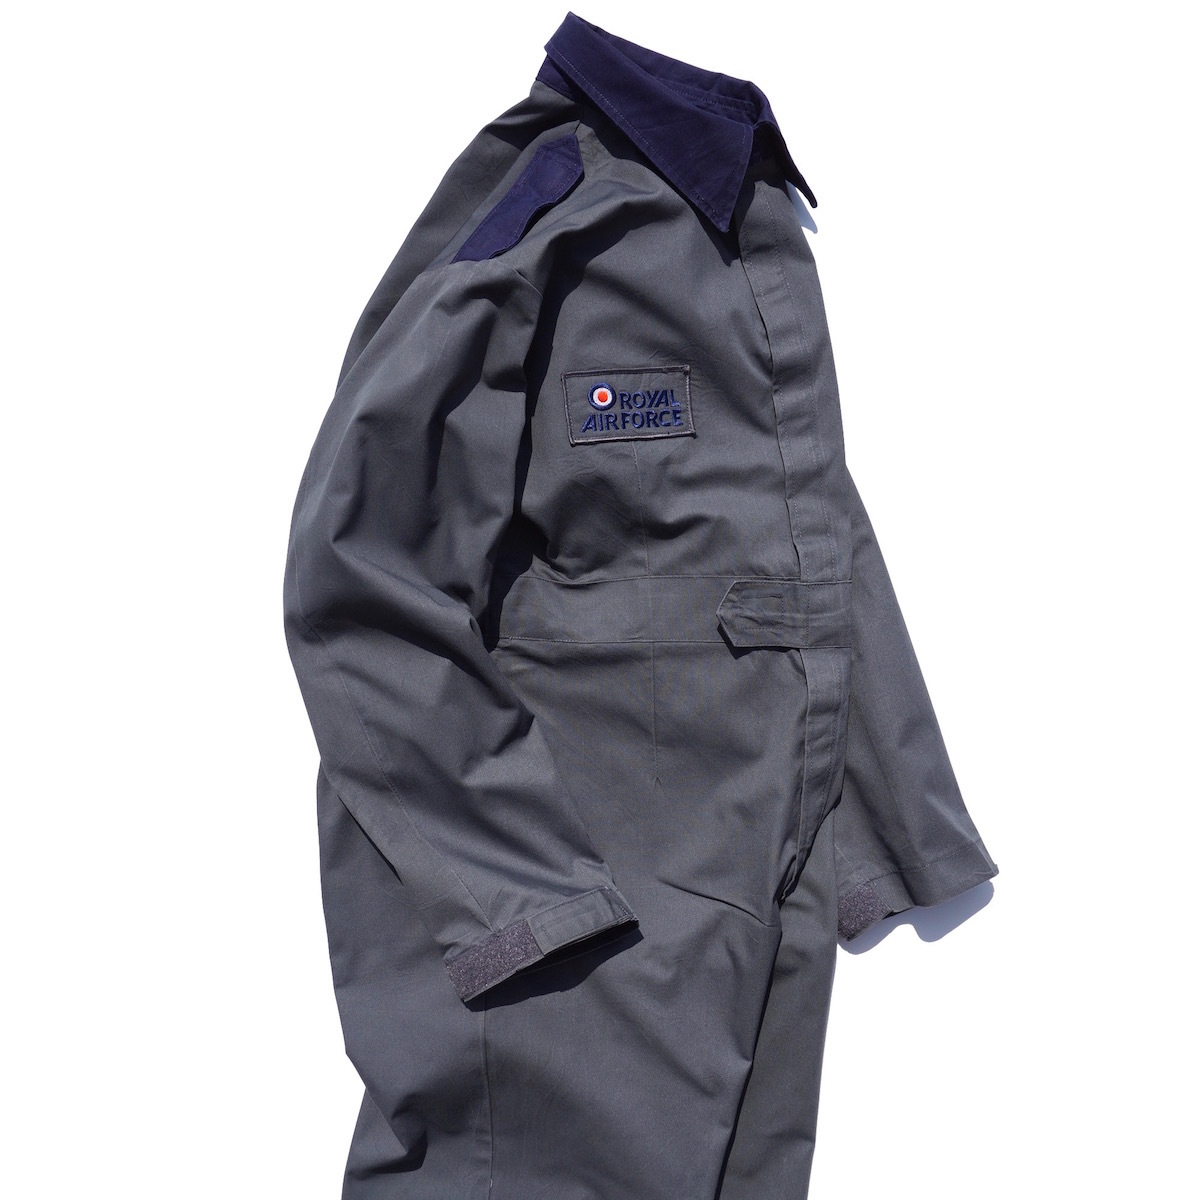 ROYAL AIR FORCE England Air Force the truth thing coverall Jump suit 170/100 gray Target Mark UKmoz all-in-one coveralls old clothes 